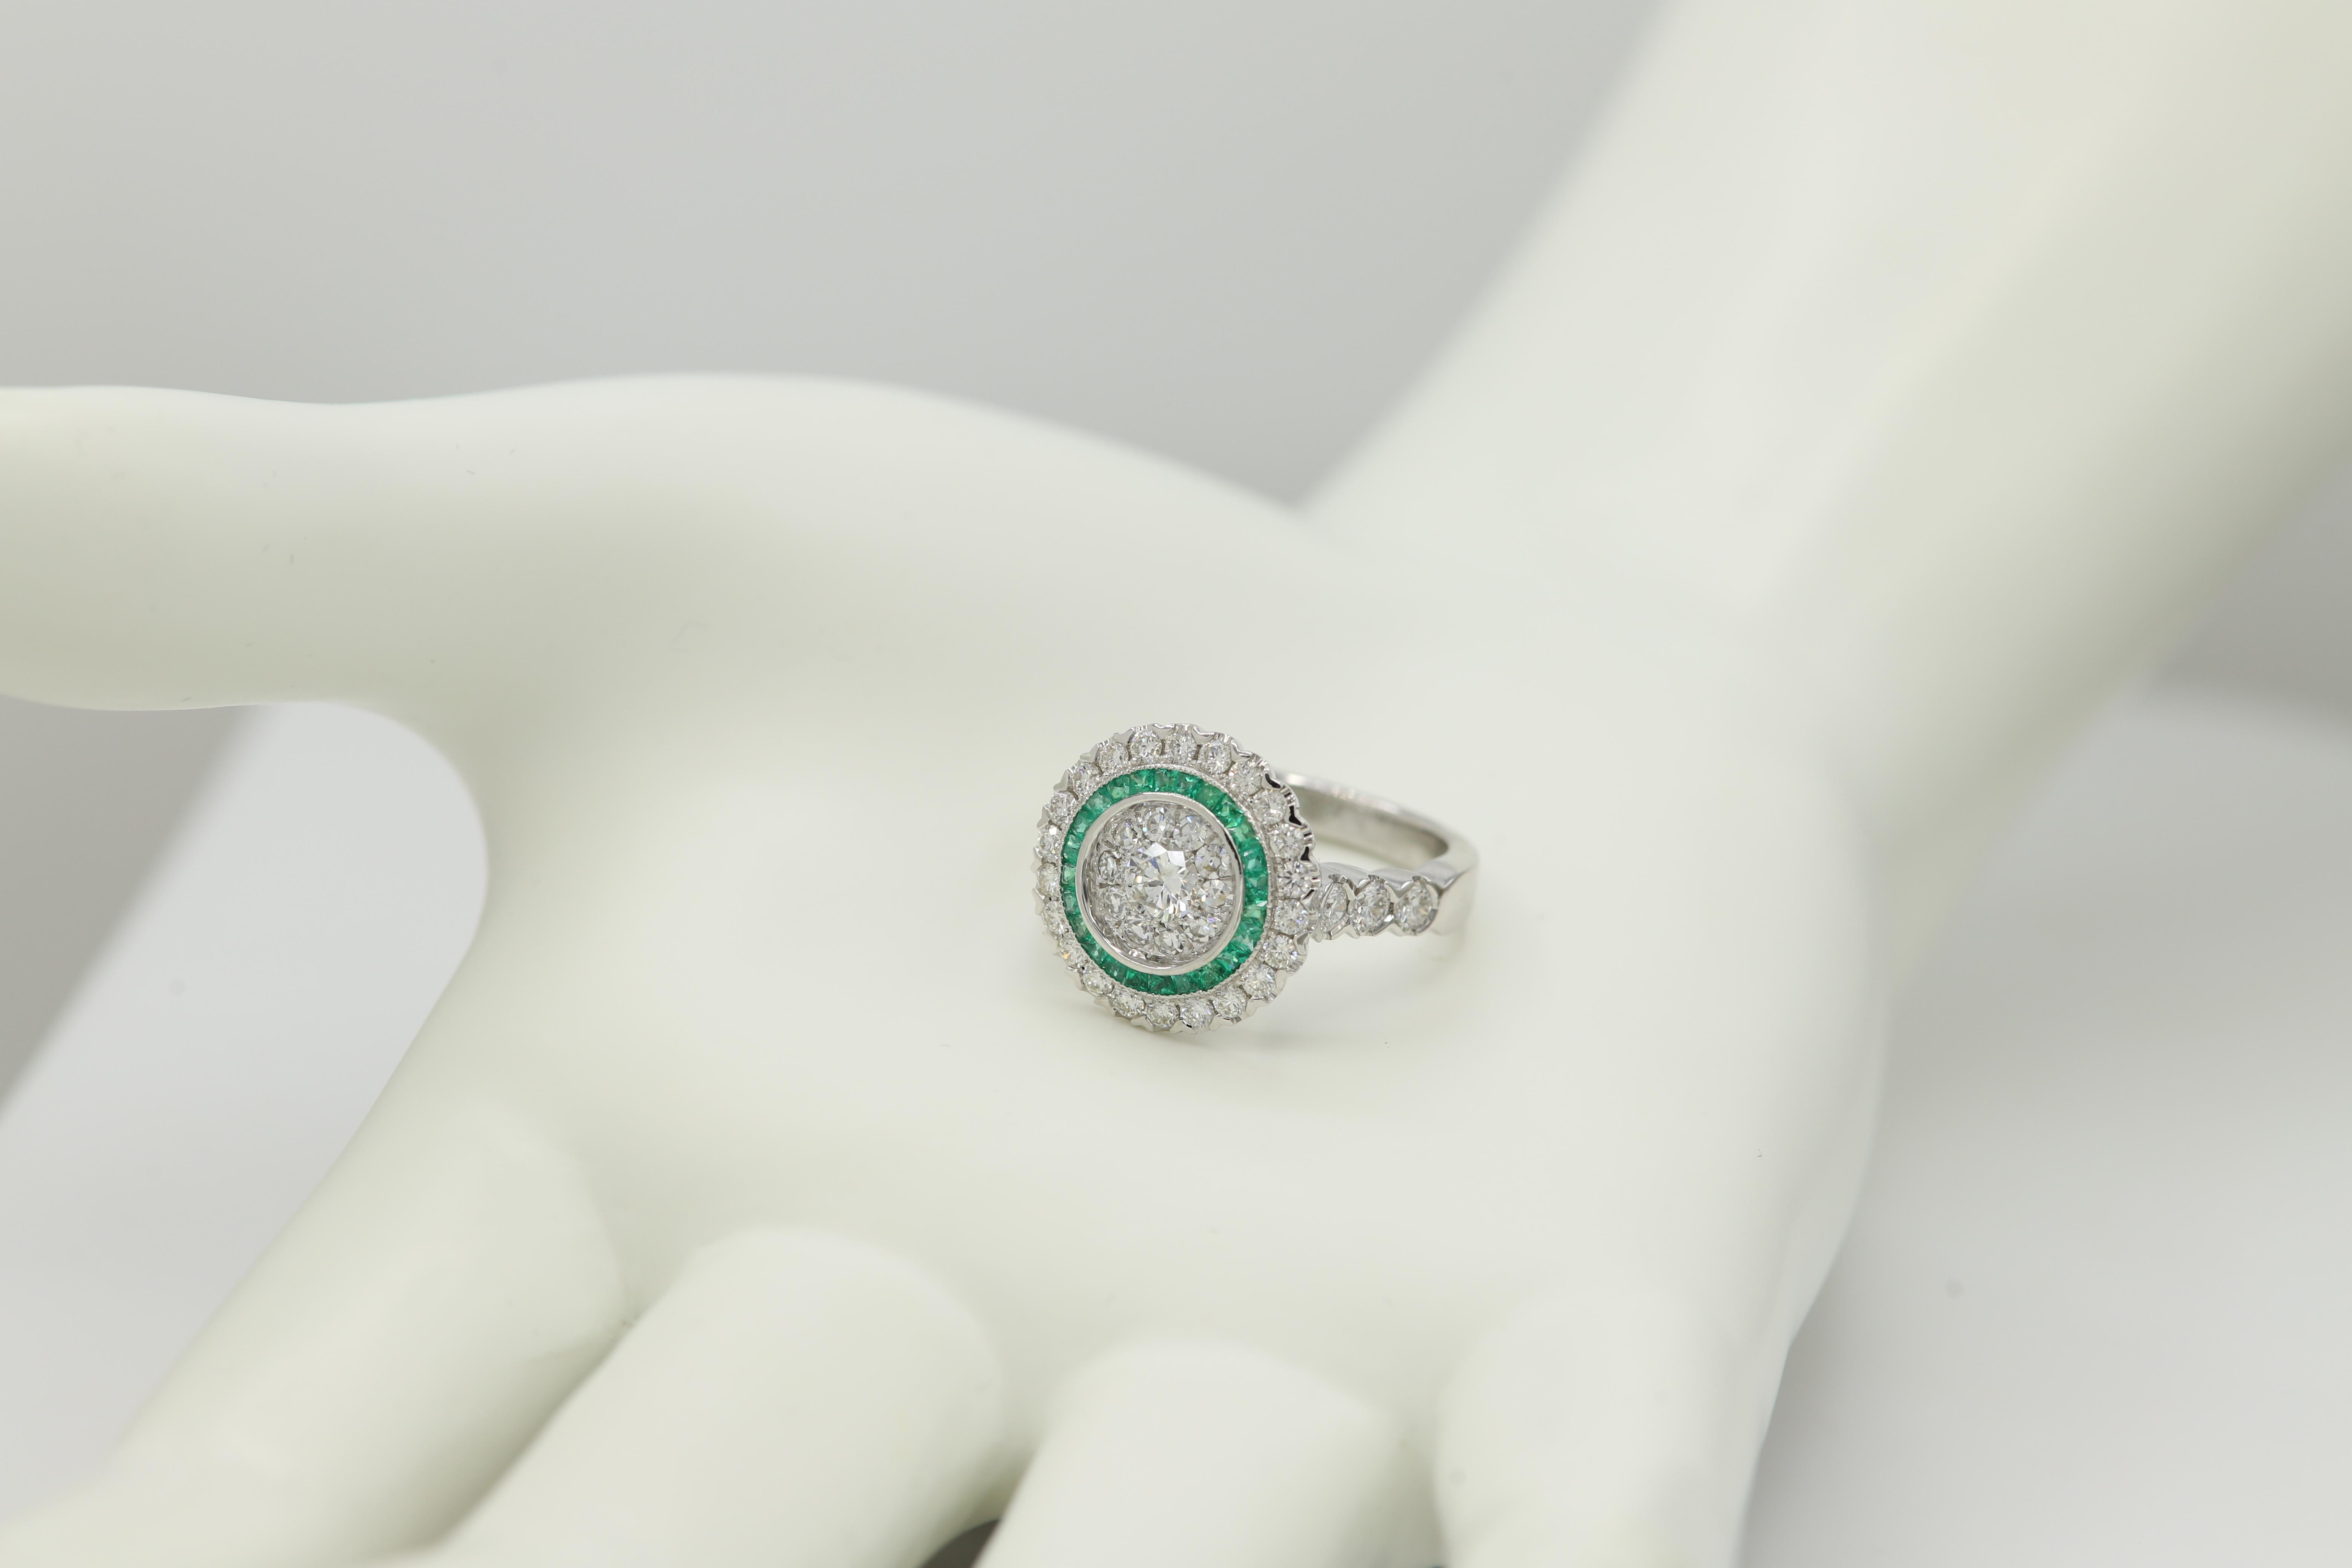 Brilliant Art Deco Style Ring. 18k White Gold 8.0 grams. Total all Diamonds 1.75 carat (center stones are a super cluster of diamonds that look as a single stone to the eye) GH-SI. Emerald total 0.45 carat. design area on top diameter approx 16 mm